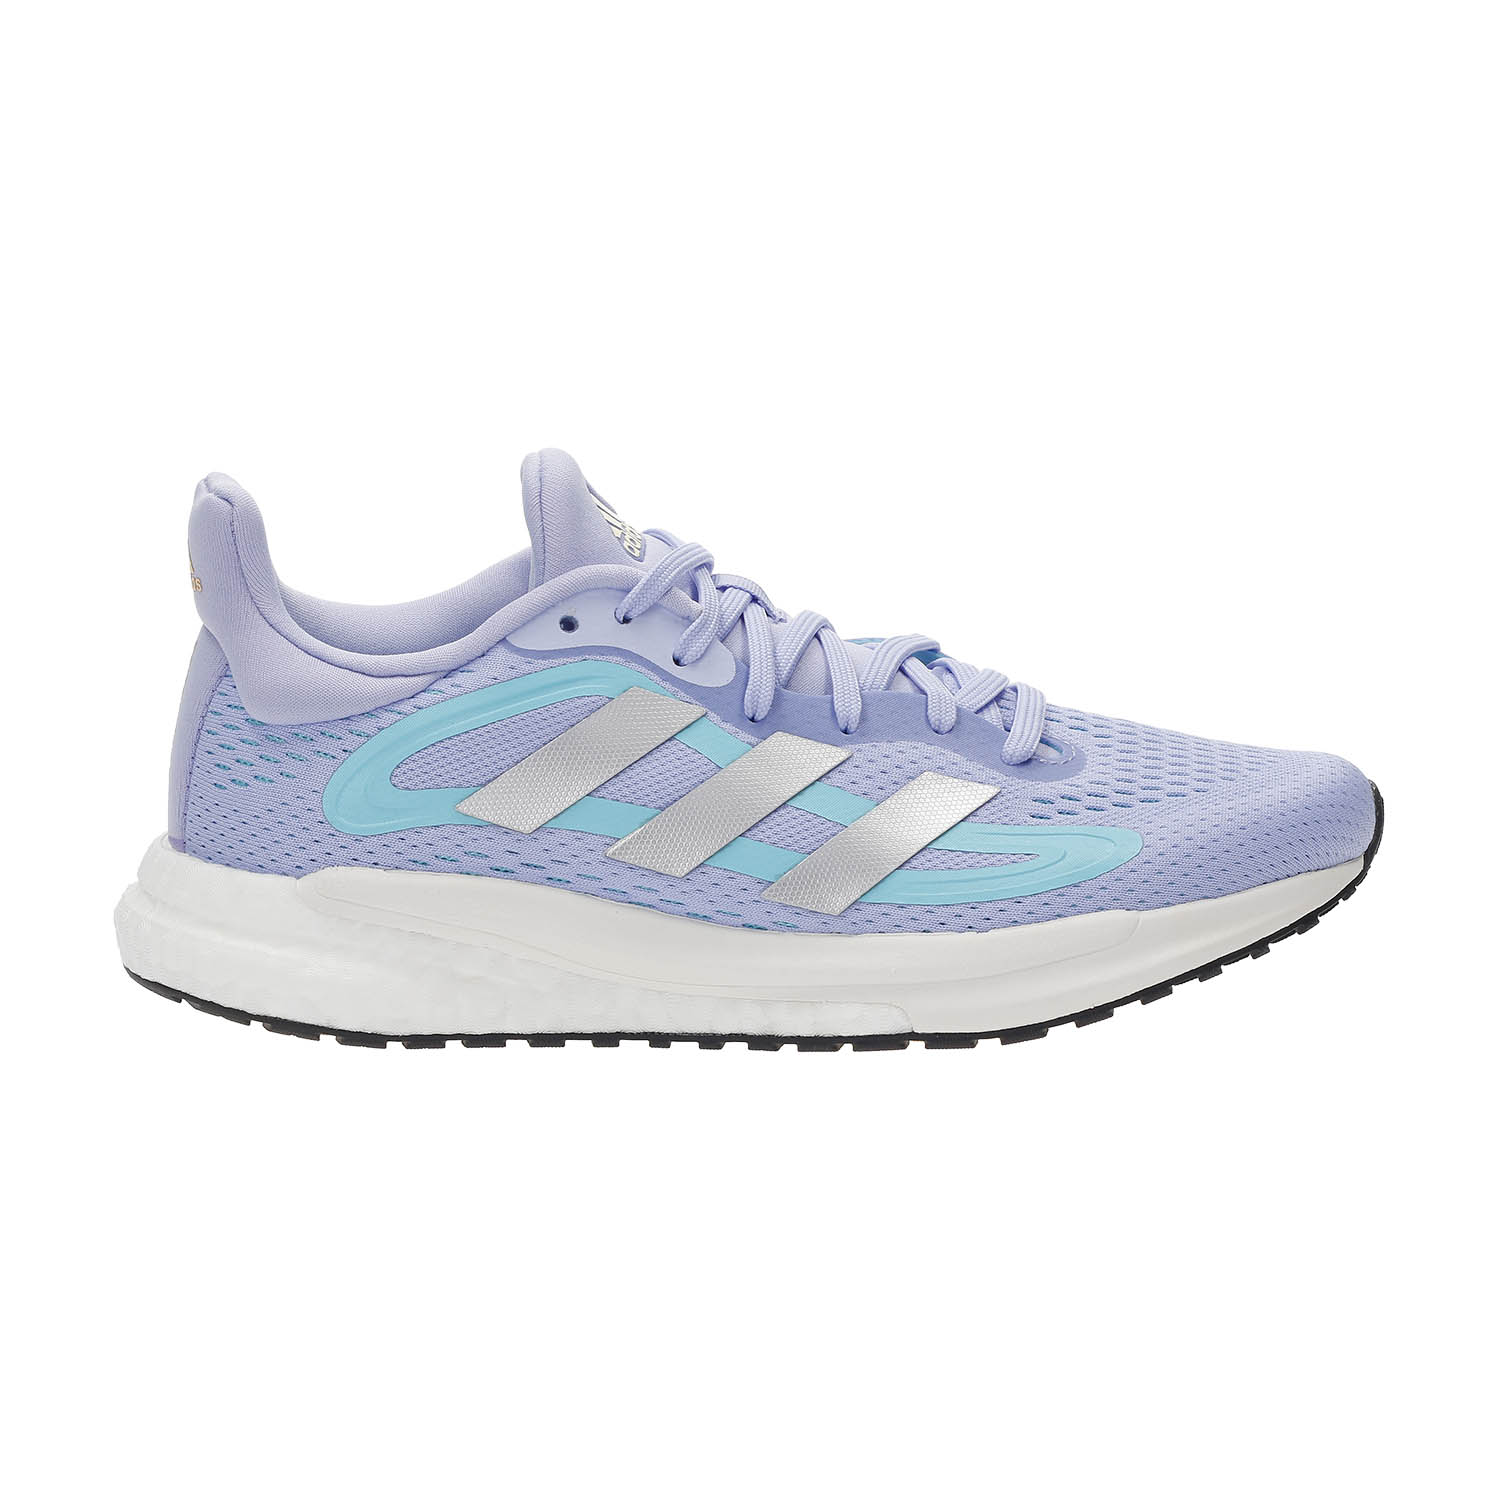 adidas running shoes violet